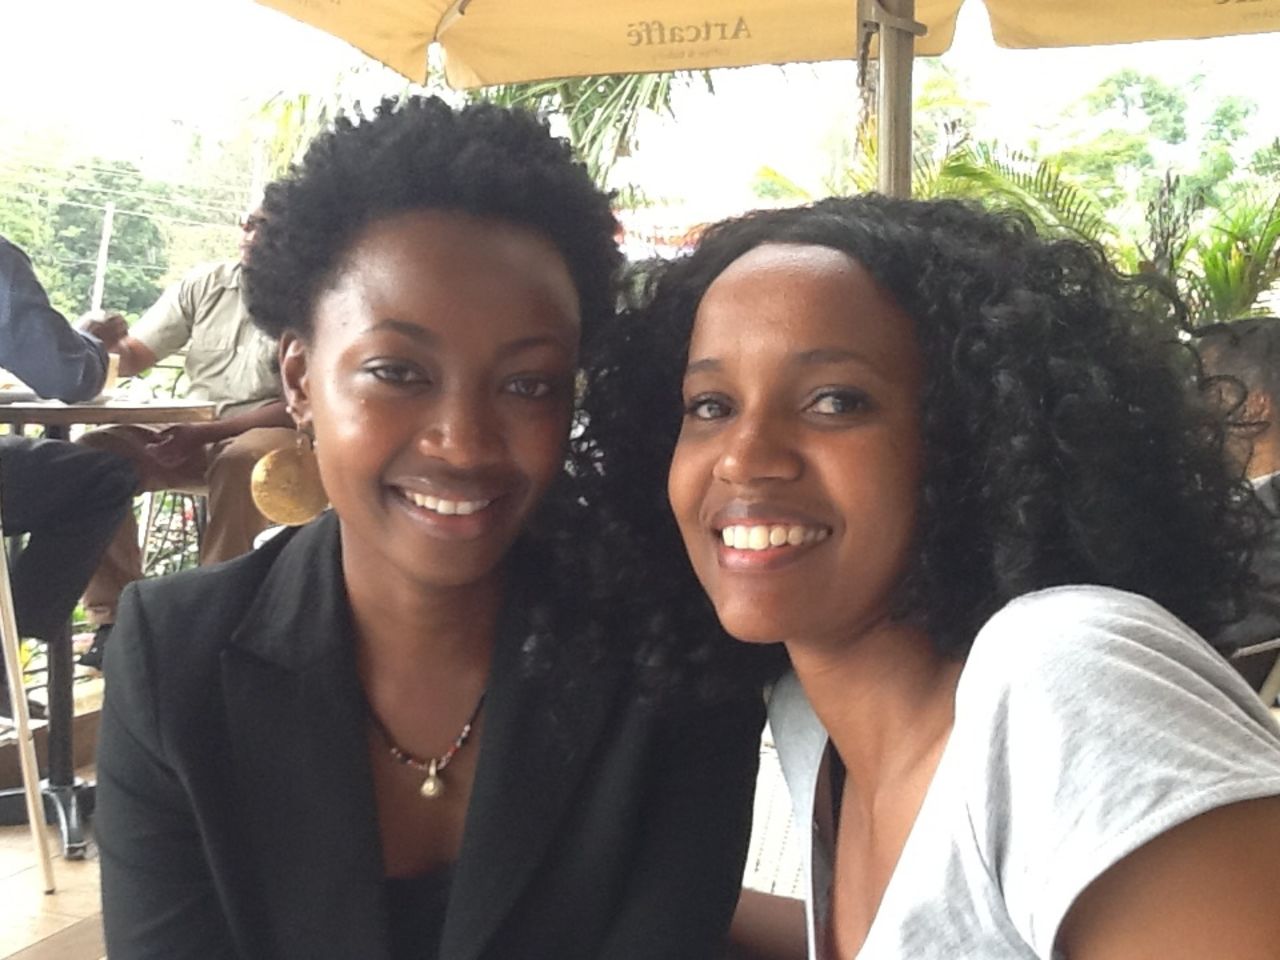 CNN's Errol Barnett checks the claim that Kenyans, known as #KOTs in the twitterverse, are one of the most vocal groups on social networks. On this week's Inside Africa, he sets off on a mission to meet some tech-savvy Kenyans, like Pierra Mckenna and Makena Mutwiri pictured here.